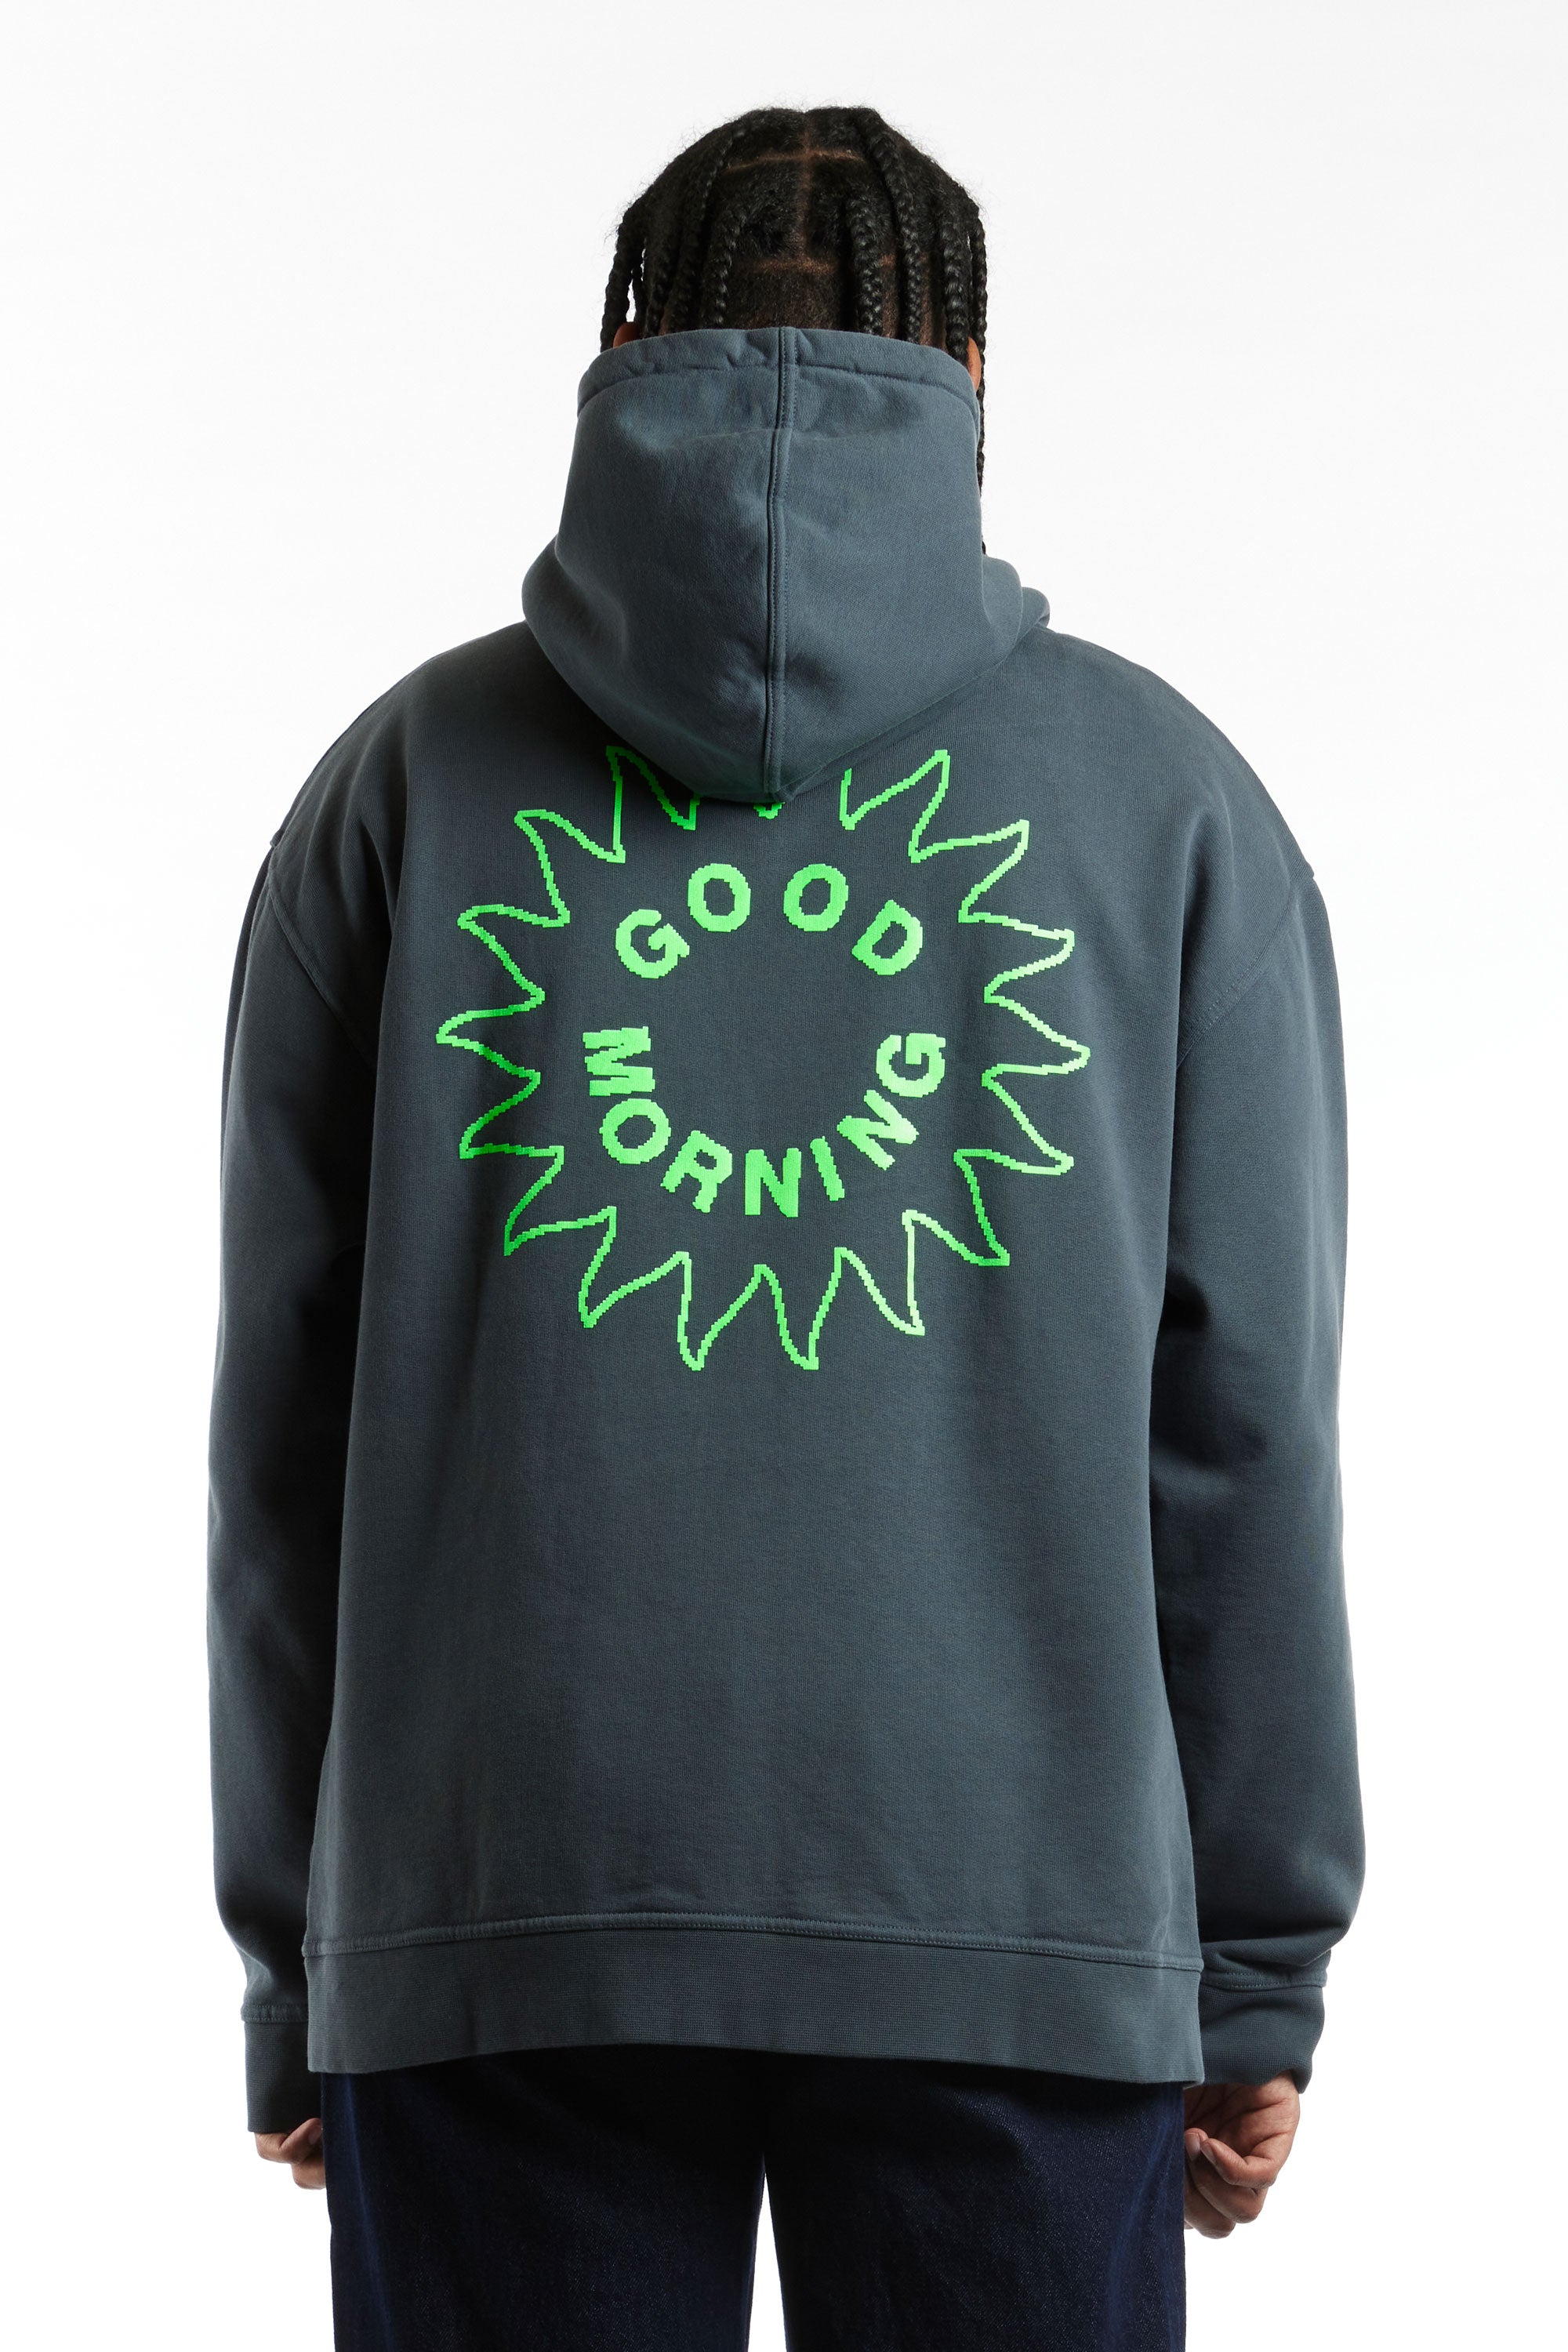 The GOOD MORNING TAPES - SUN LOGO FLEECE PULLOVER HOOD  available online with global shipping, and in PAM Stores Melbourne and Sydney.